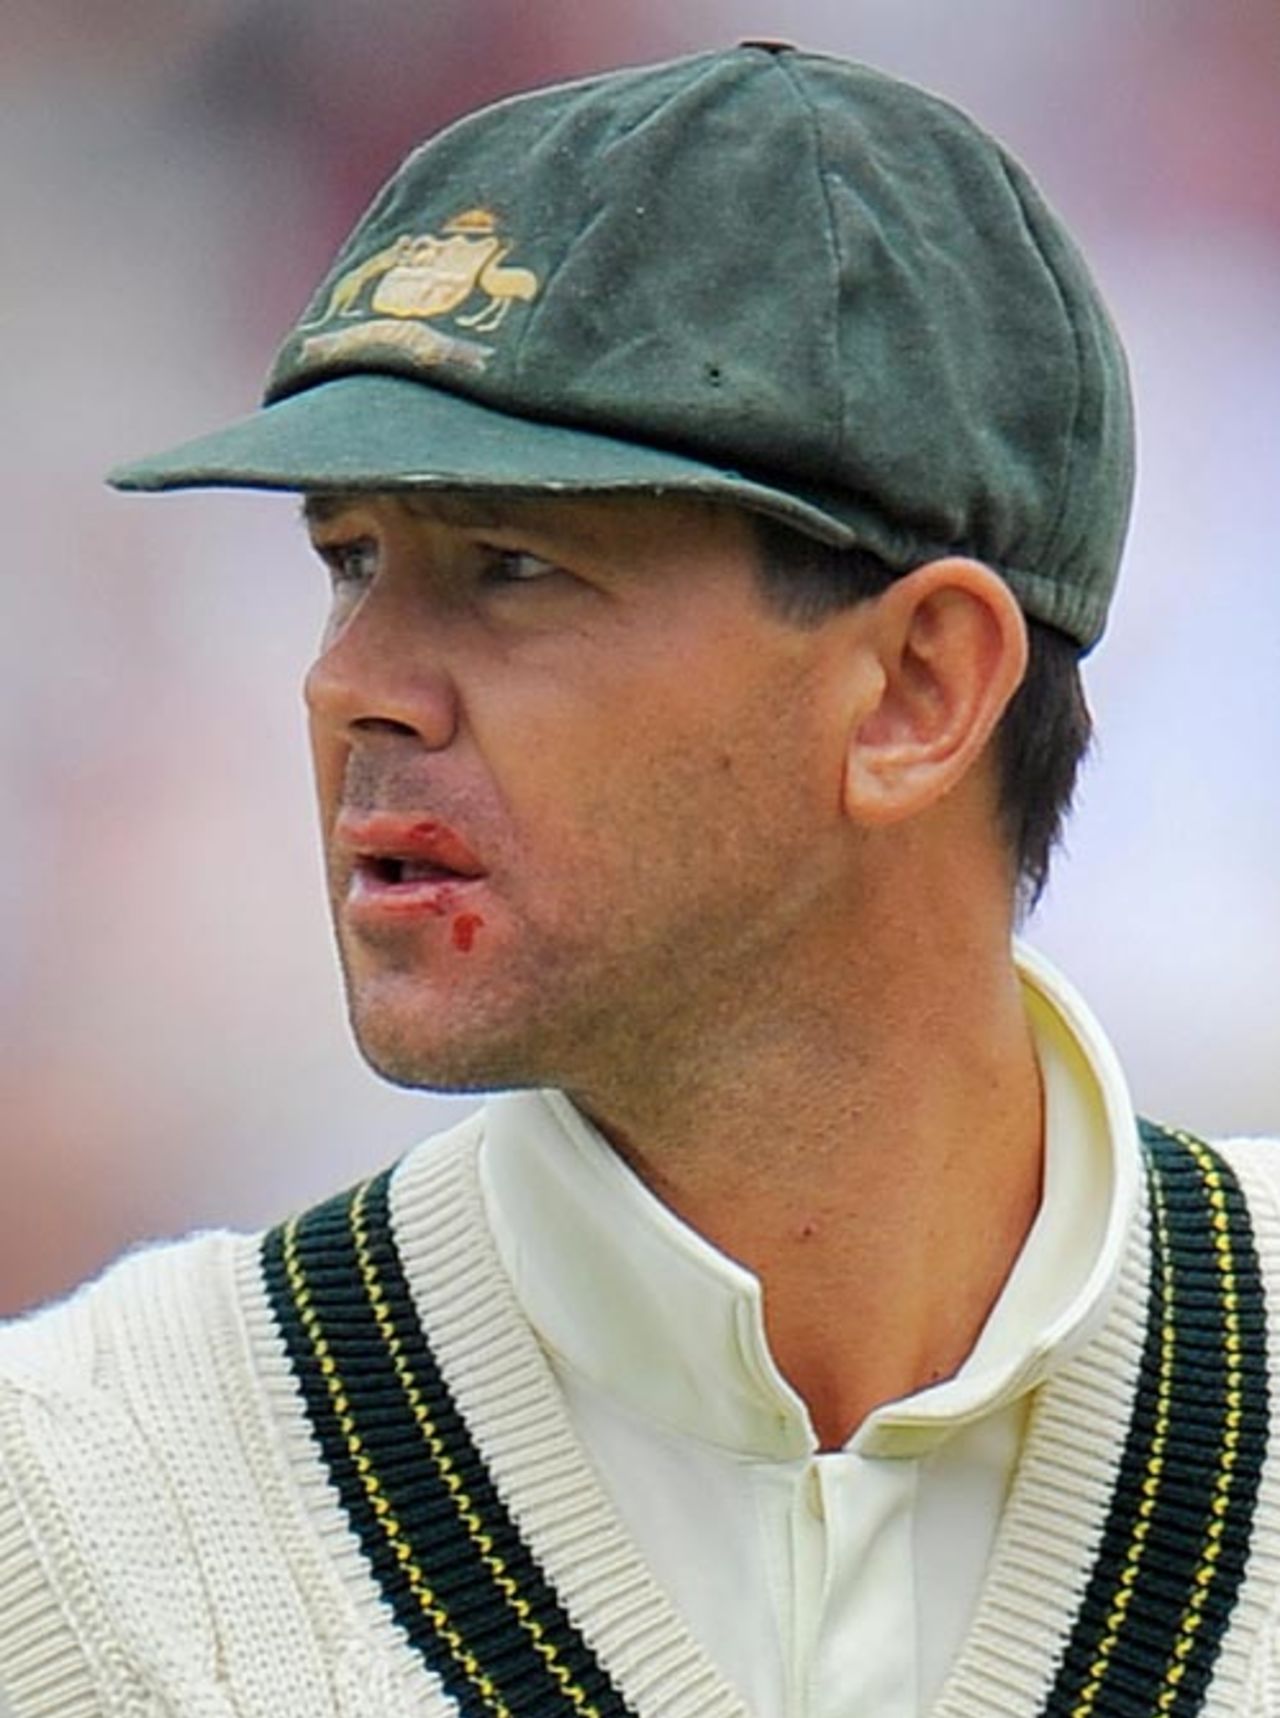 Ricky Ponting with a bloody lip, England v Australia, 5th Test, The Oval, 3rd day, August 22, 2009